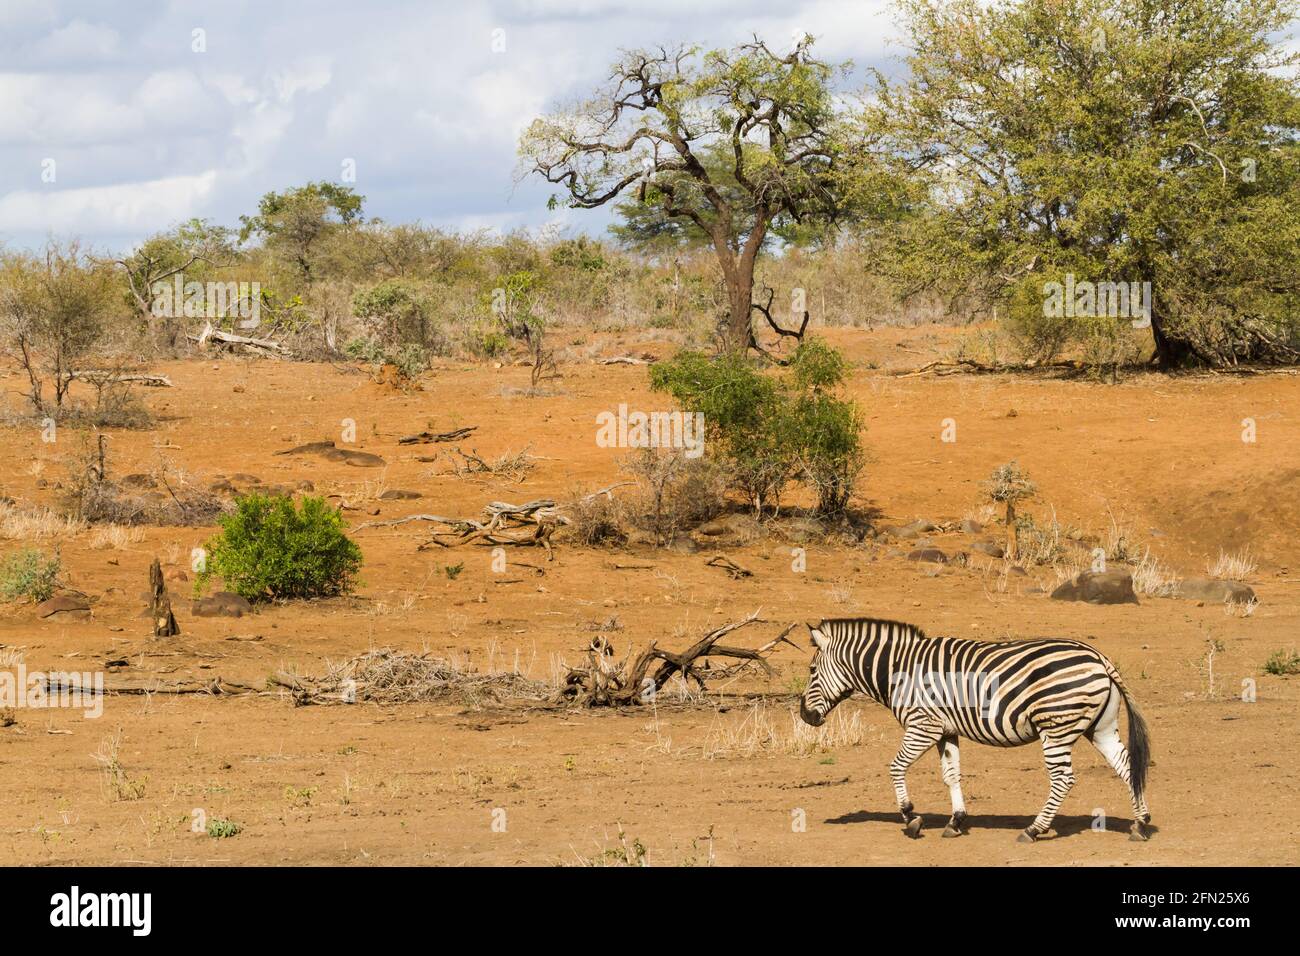 Scenic landscape view of solitary adult zebra walking alone through the sandy bushveld in Kruger National Park, South Africa Stock Photo